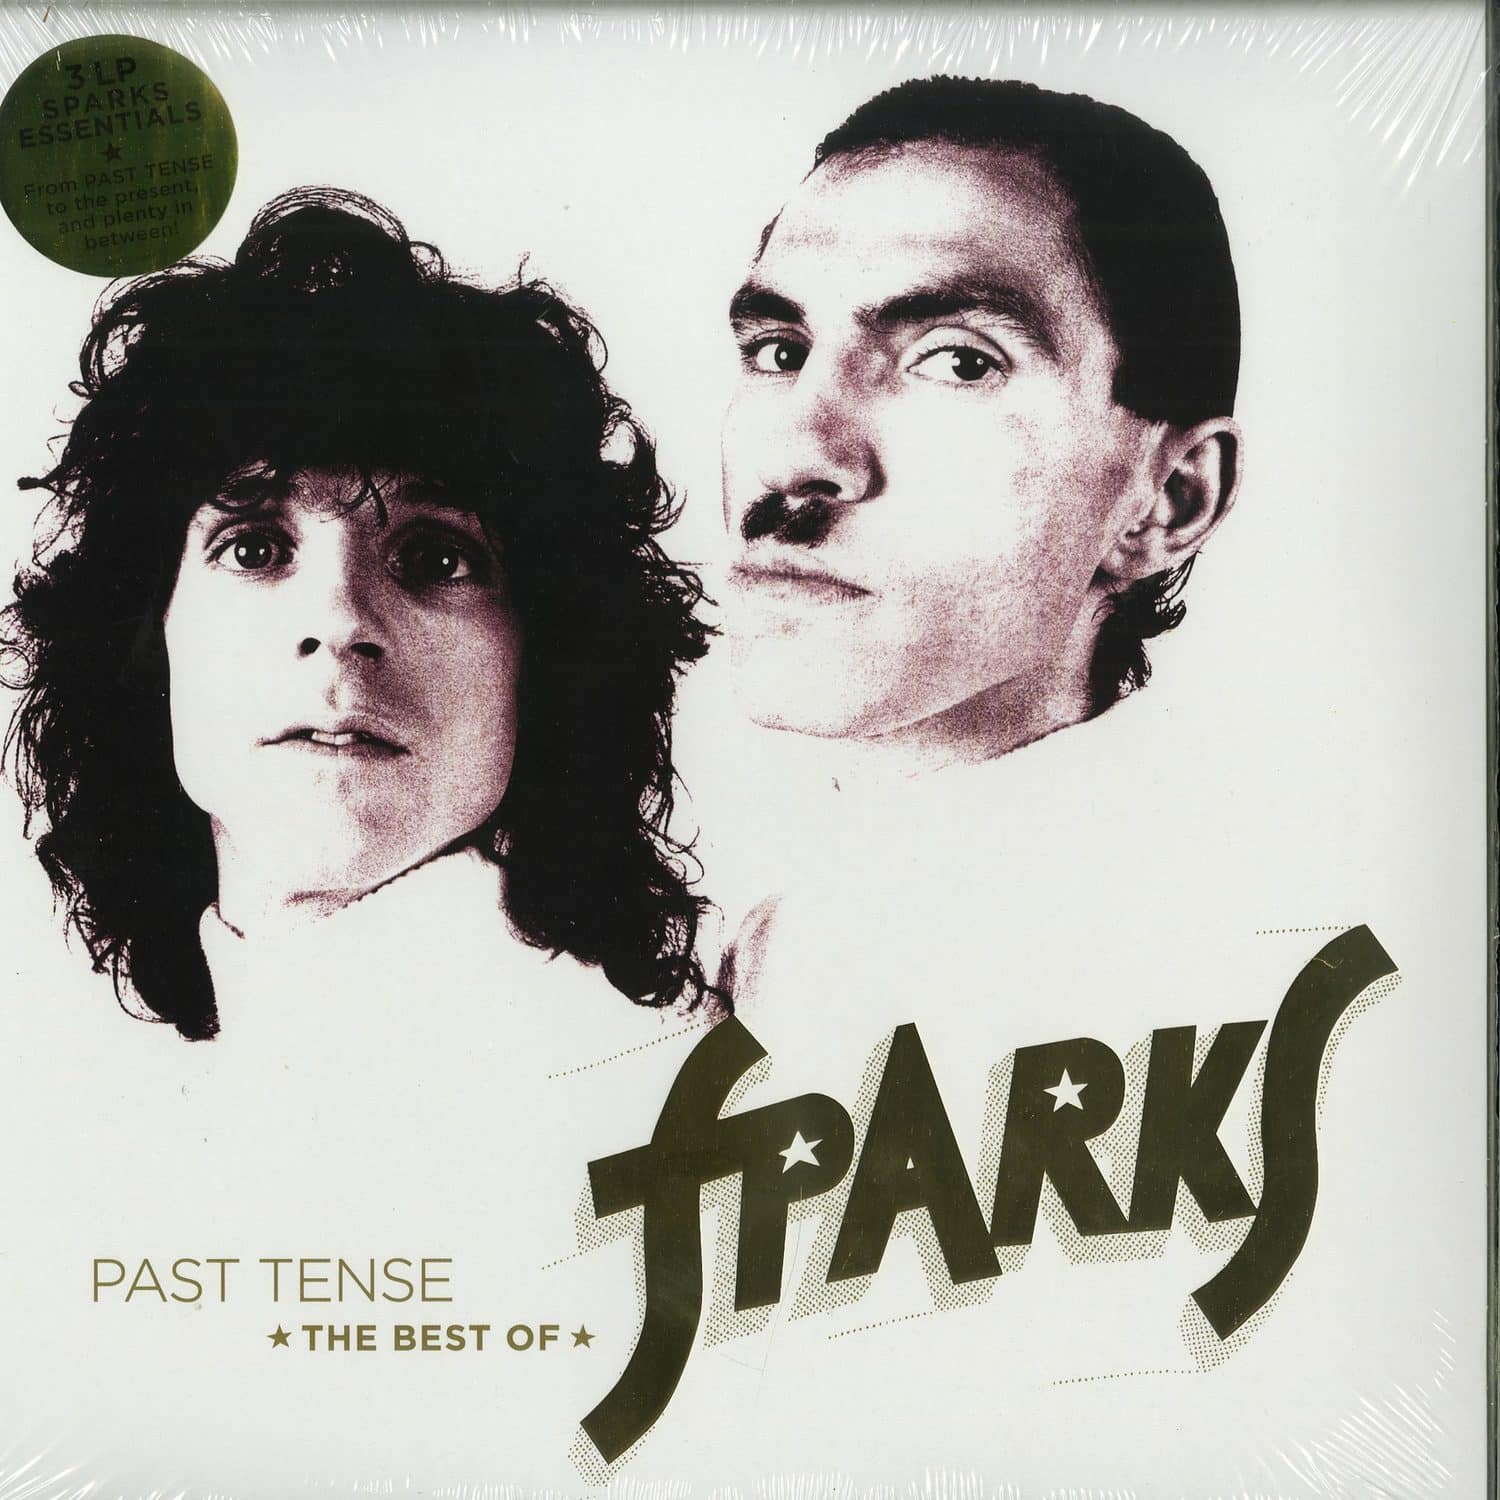 Sparks - PAST TENSE - THE BEST OF SPARKS 